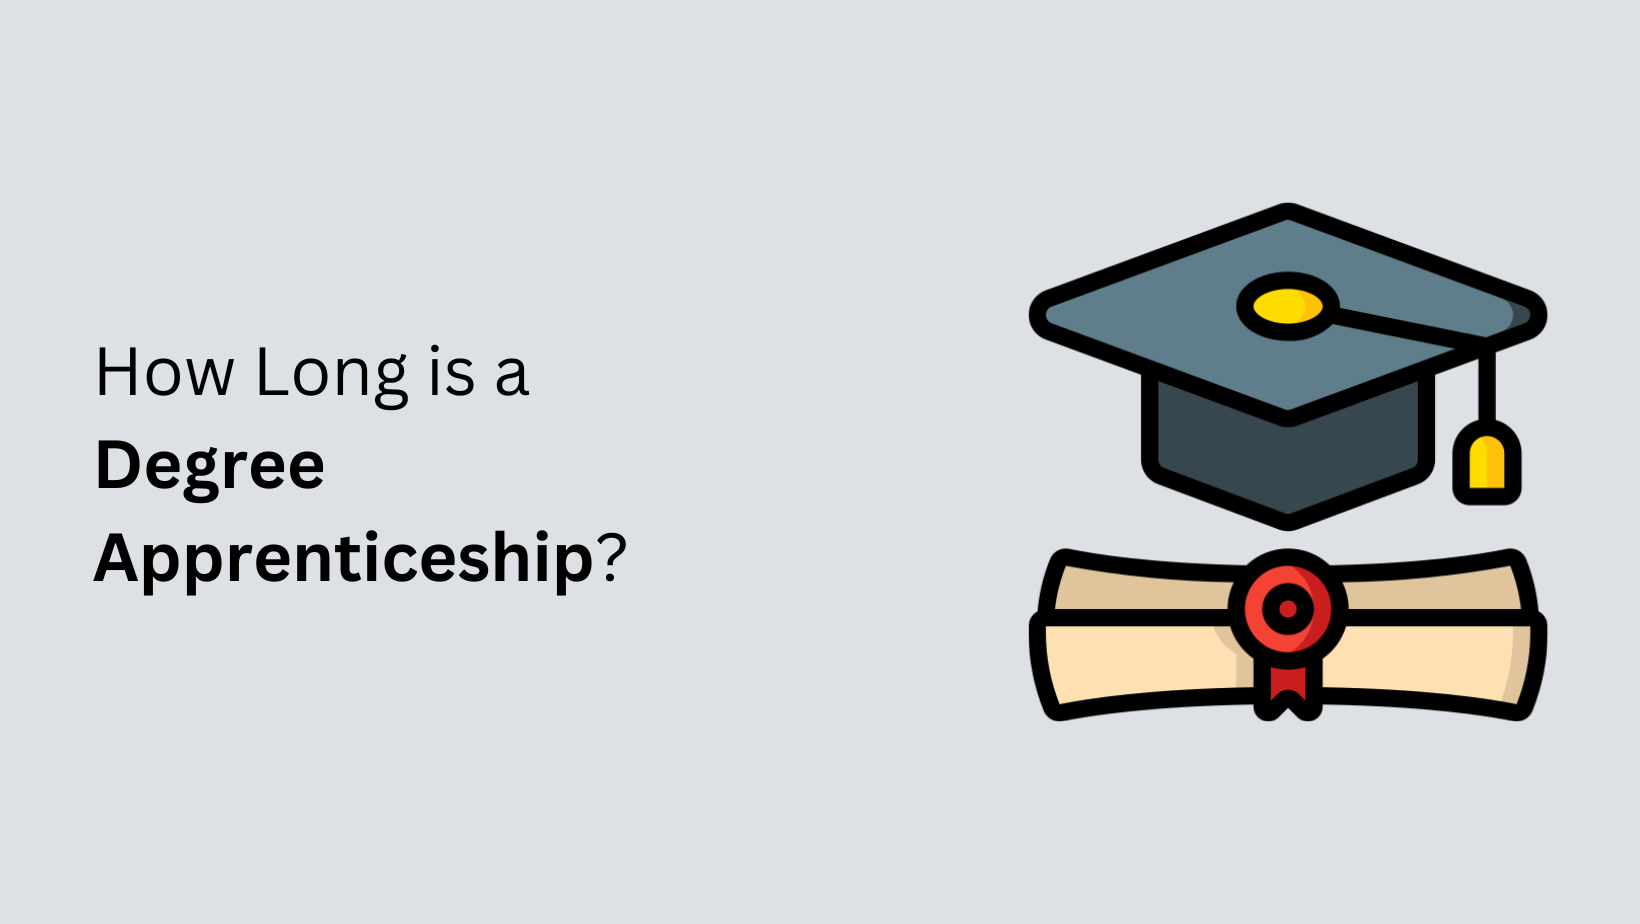 How Long is a Degree Apprenticeship